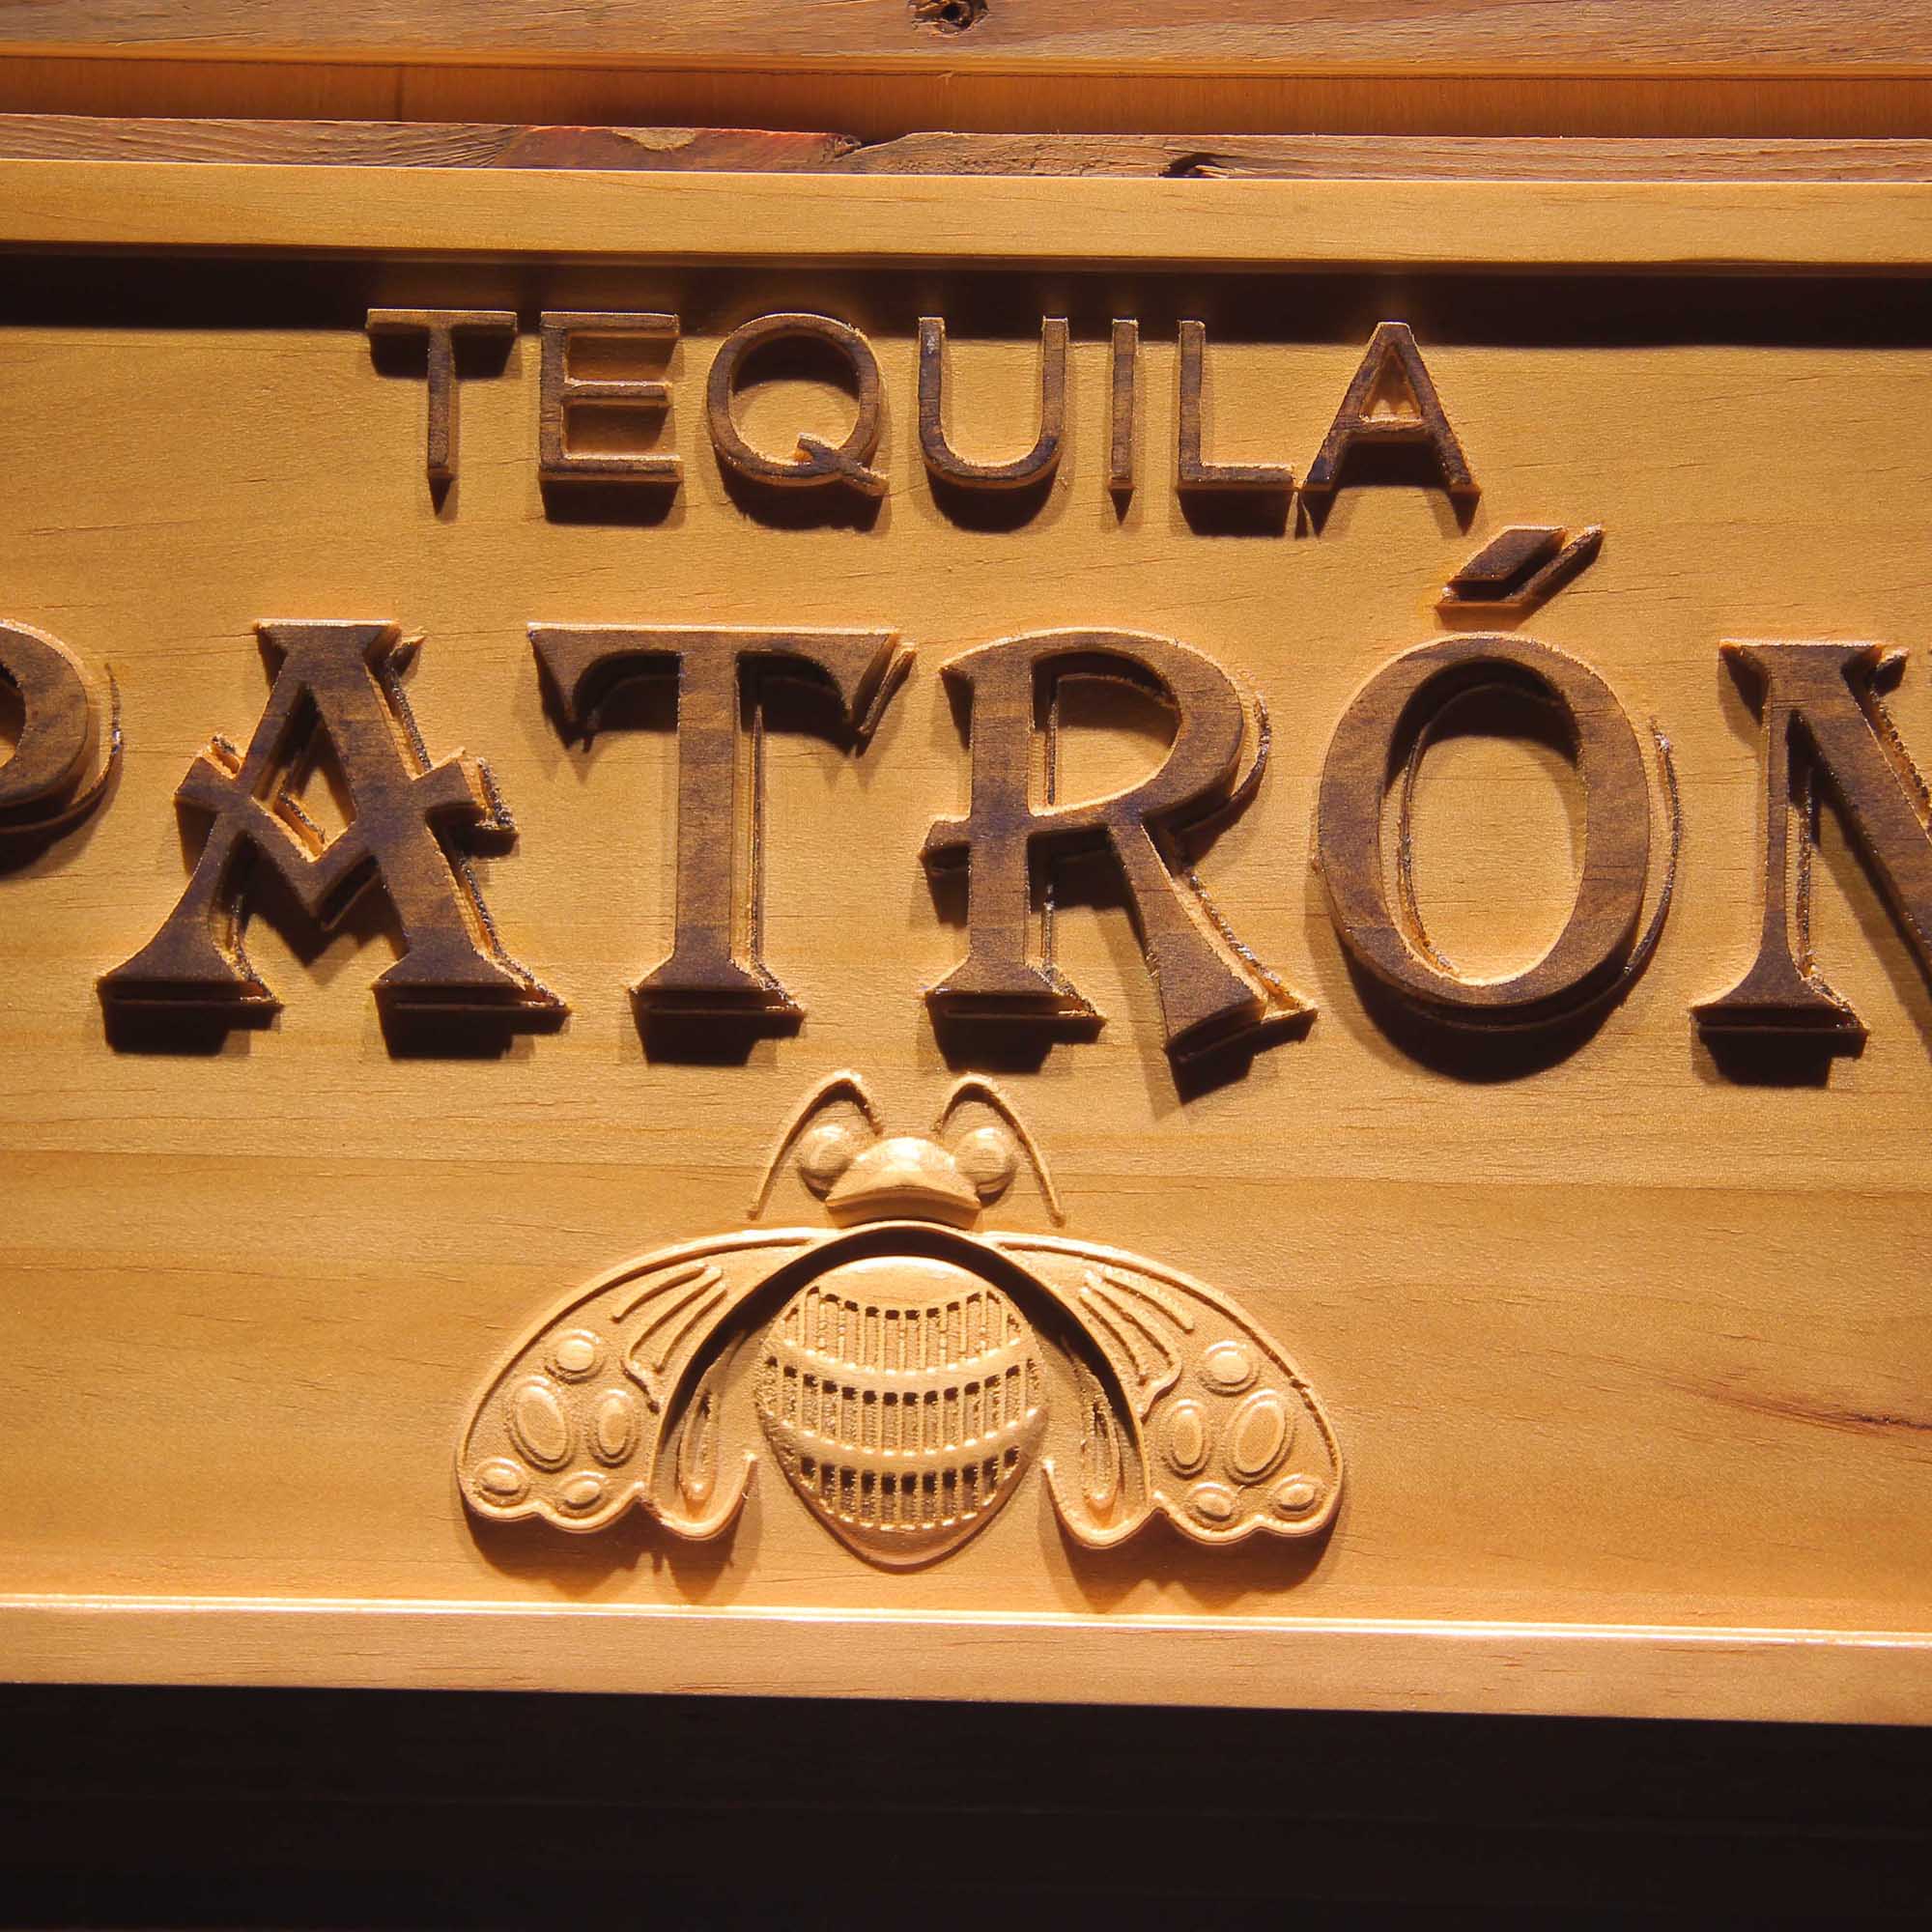 Tequila Patron 3D Wooden Engrave Sign